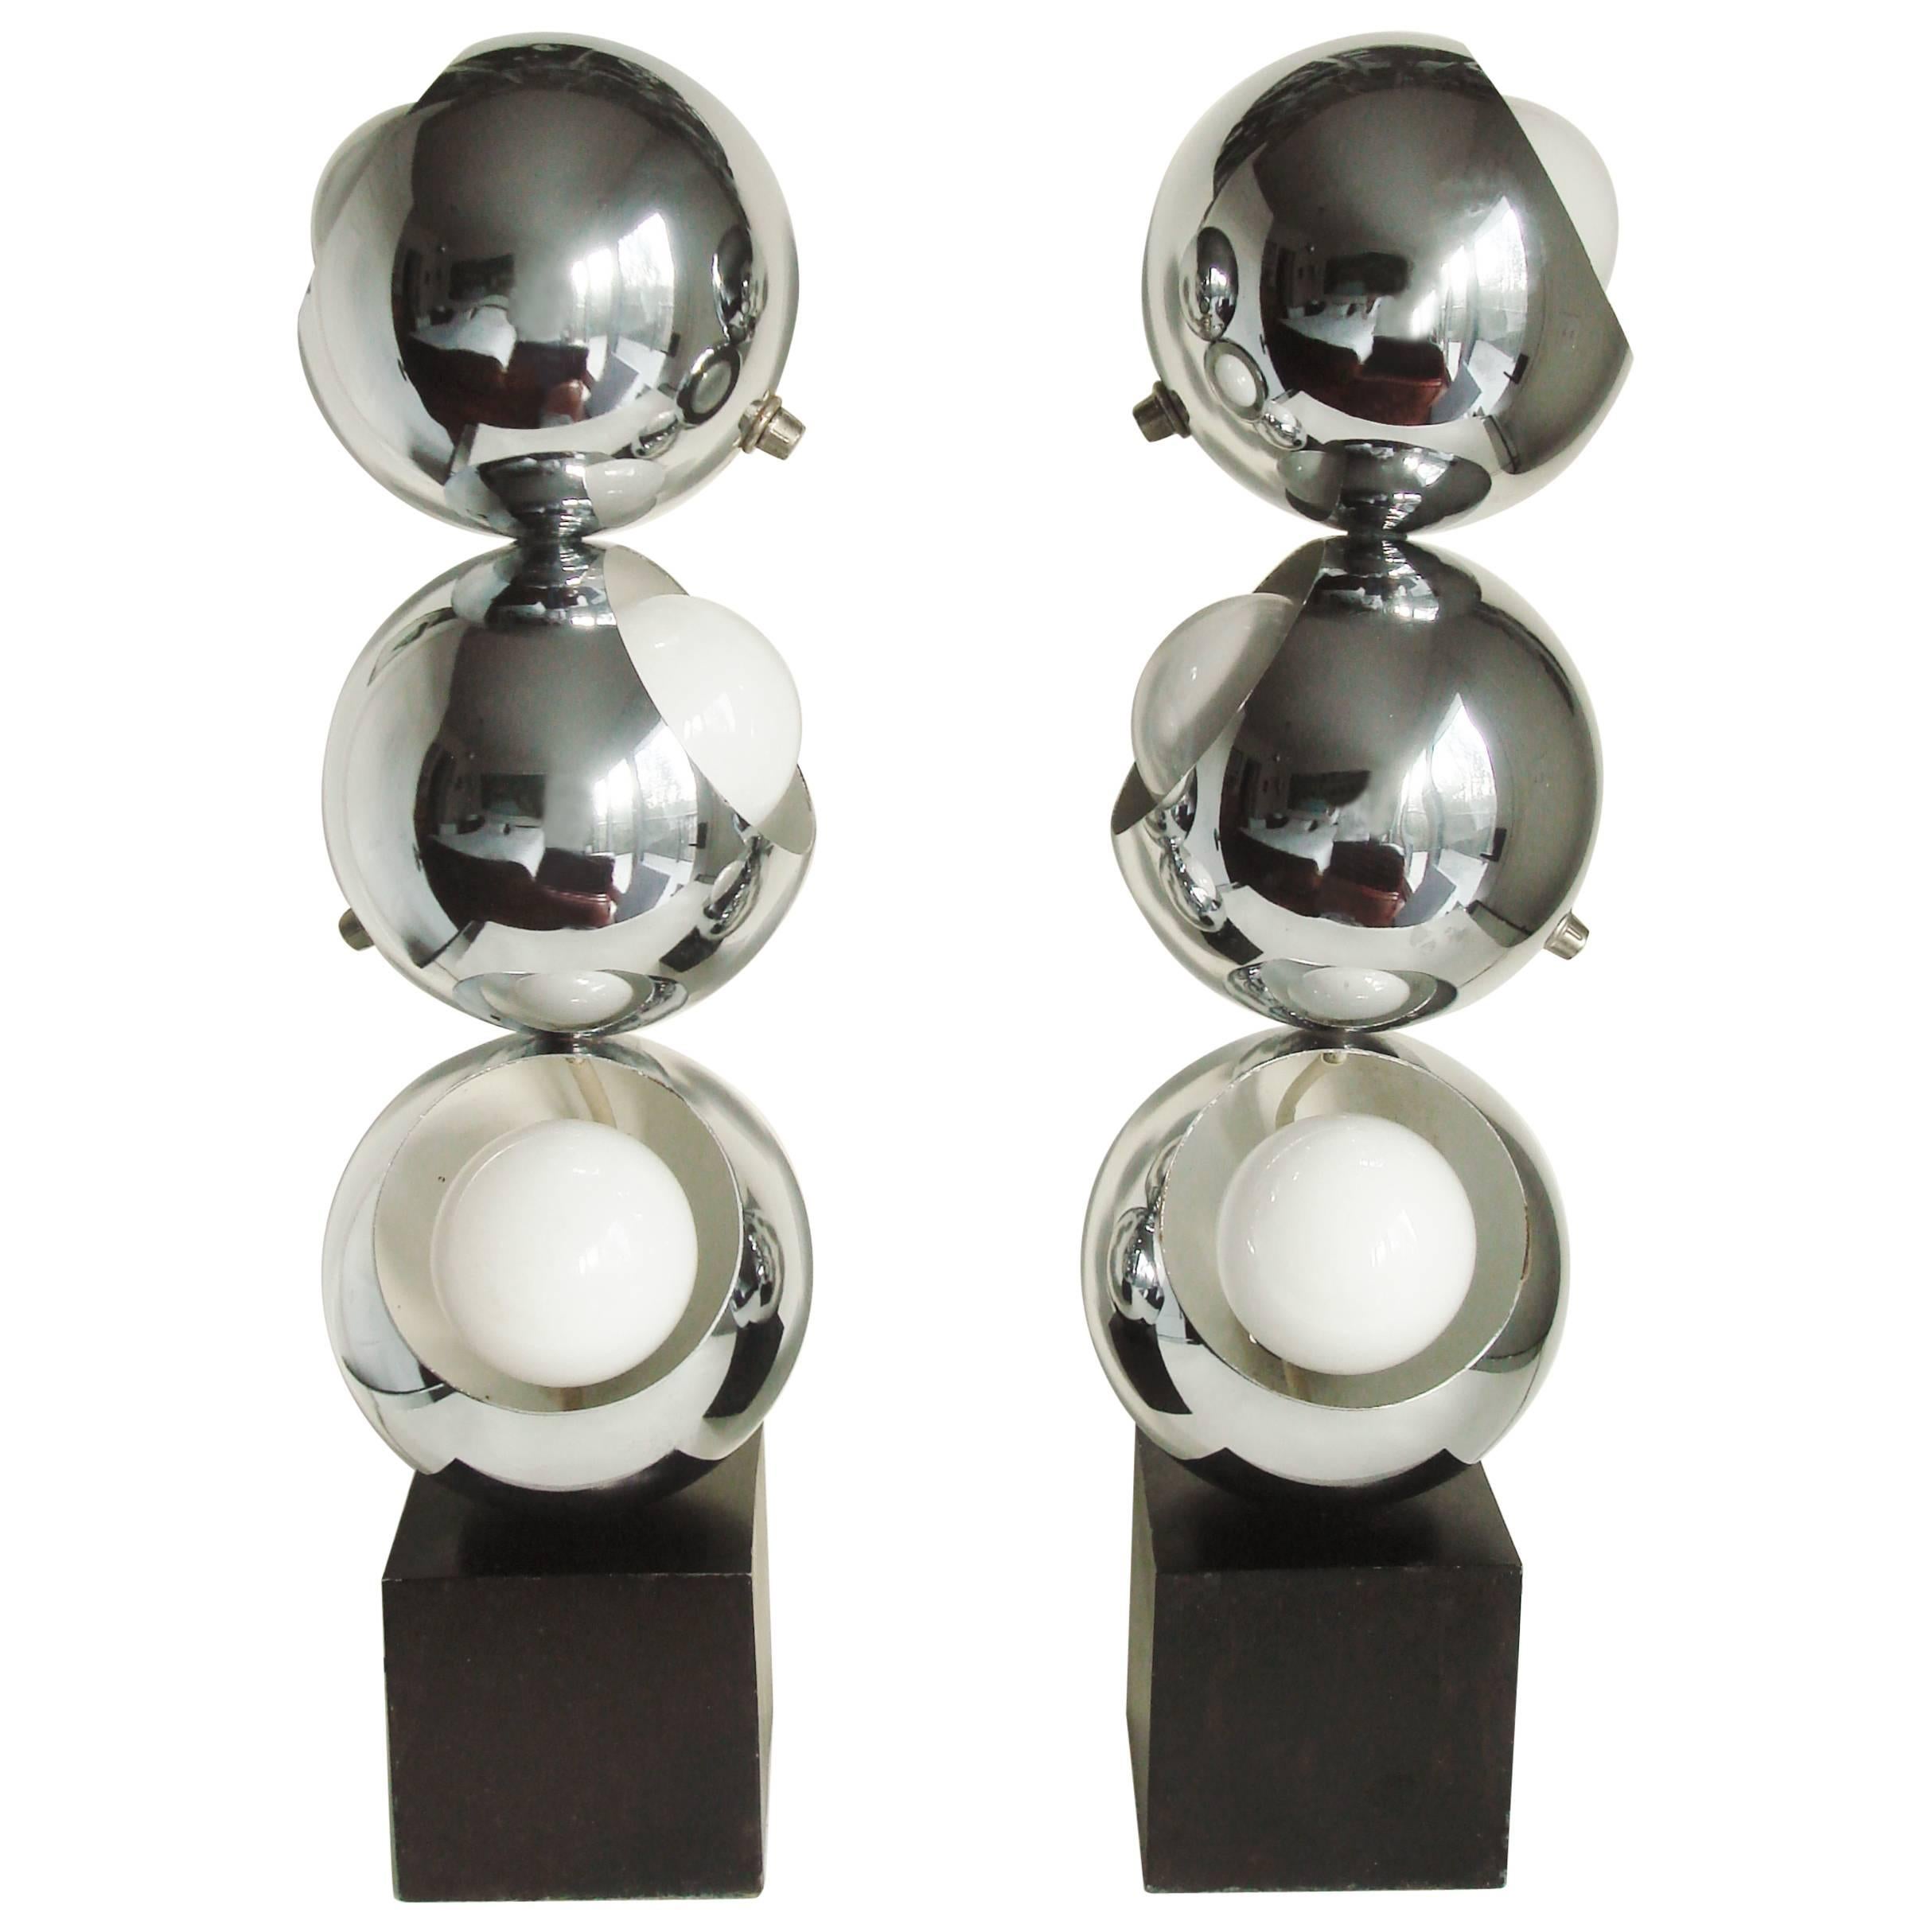 Bookmatched Pair of American 1960s Chrome and Black Enamel Triple Eyeball Lamps For Sale